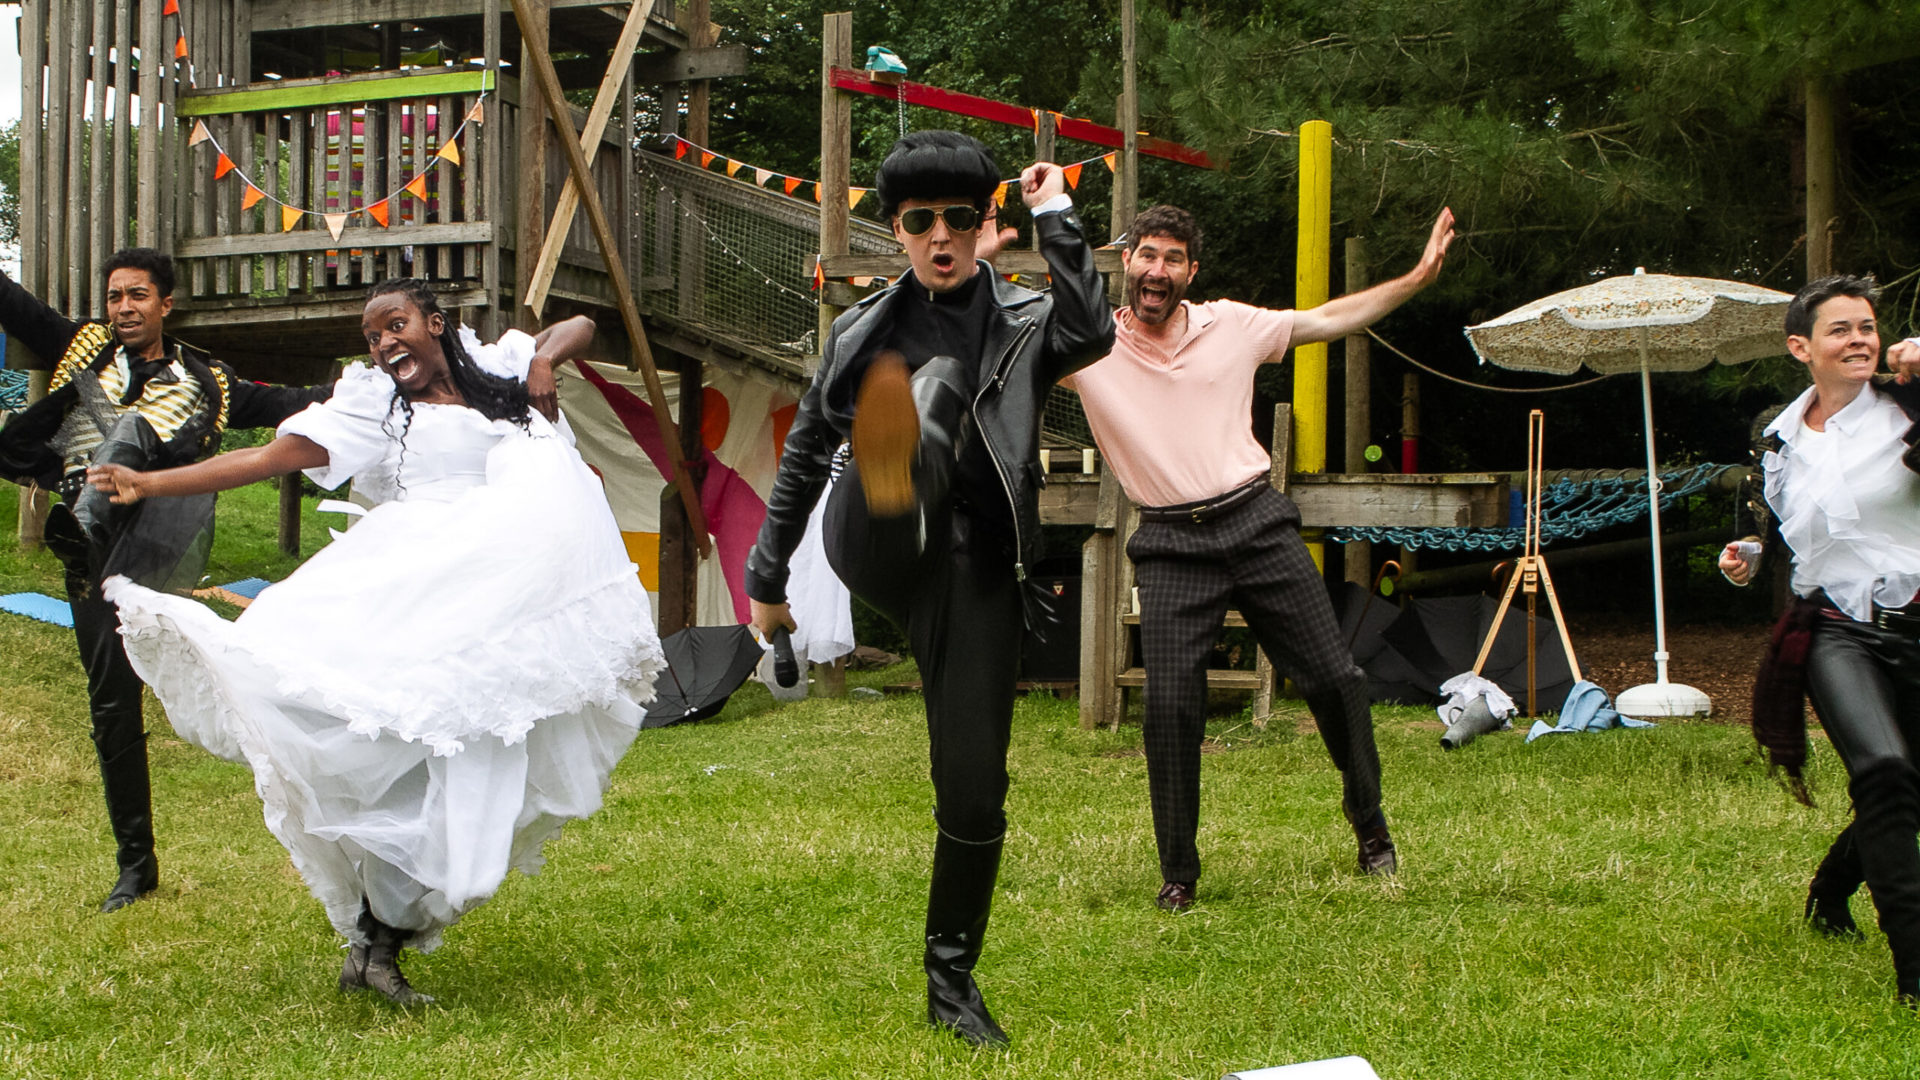 <p>Treasure Island – 6th August<br />
Enjoy an evening of open-air theatre brought to you by Creation Theatre, in association with Earth Trust.</p>
